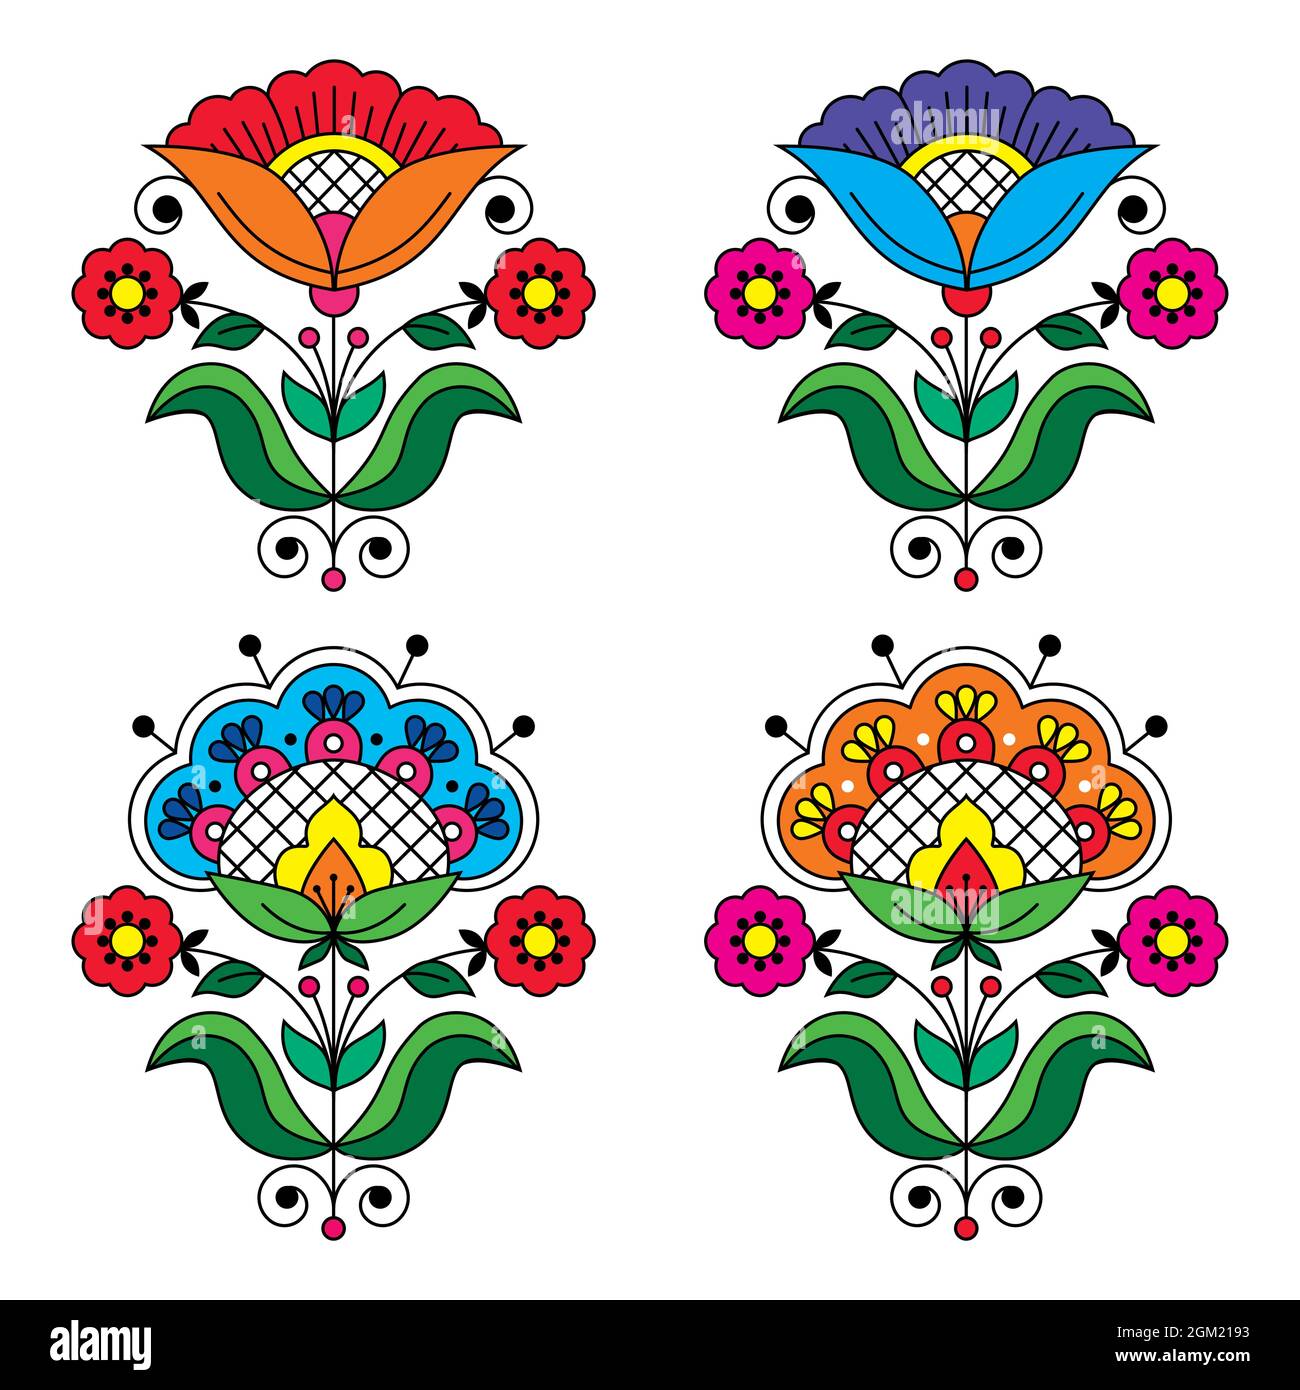 Swedish floral folk art vector colorful design set with flowers, leaves and swirls inspired by traditional Scandinavian embroidery patterns Stock Vector